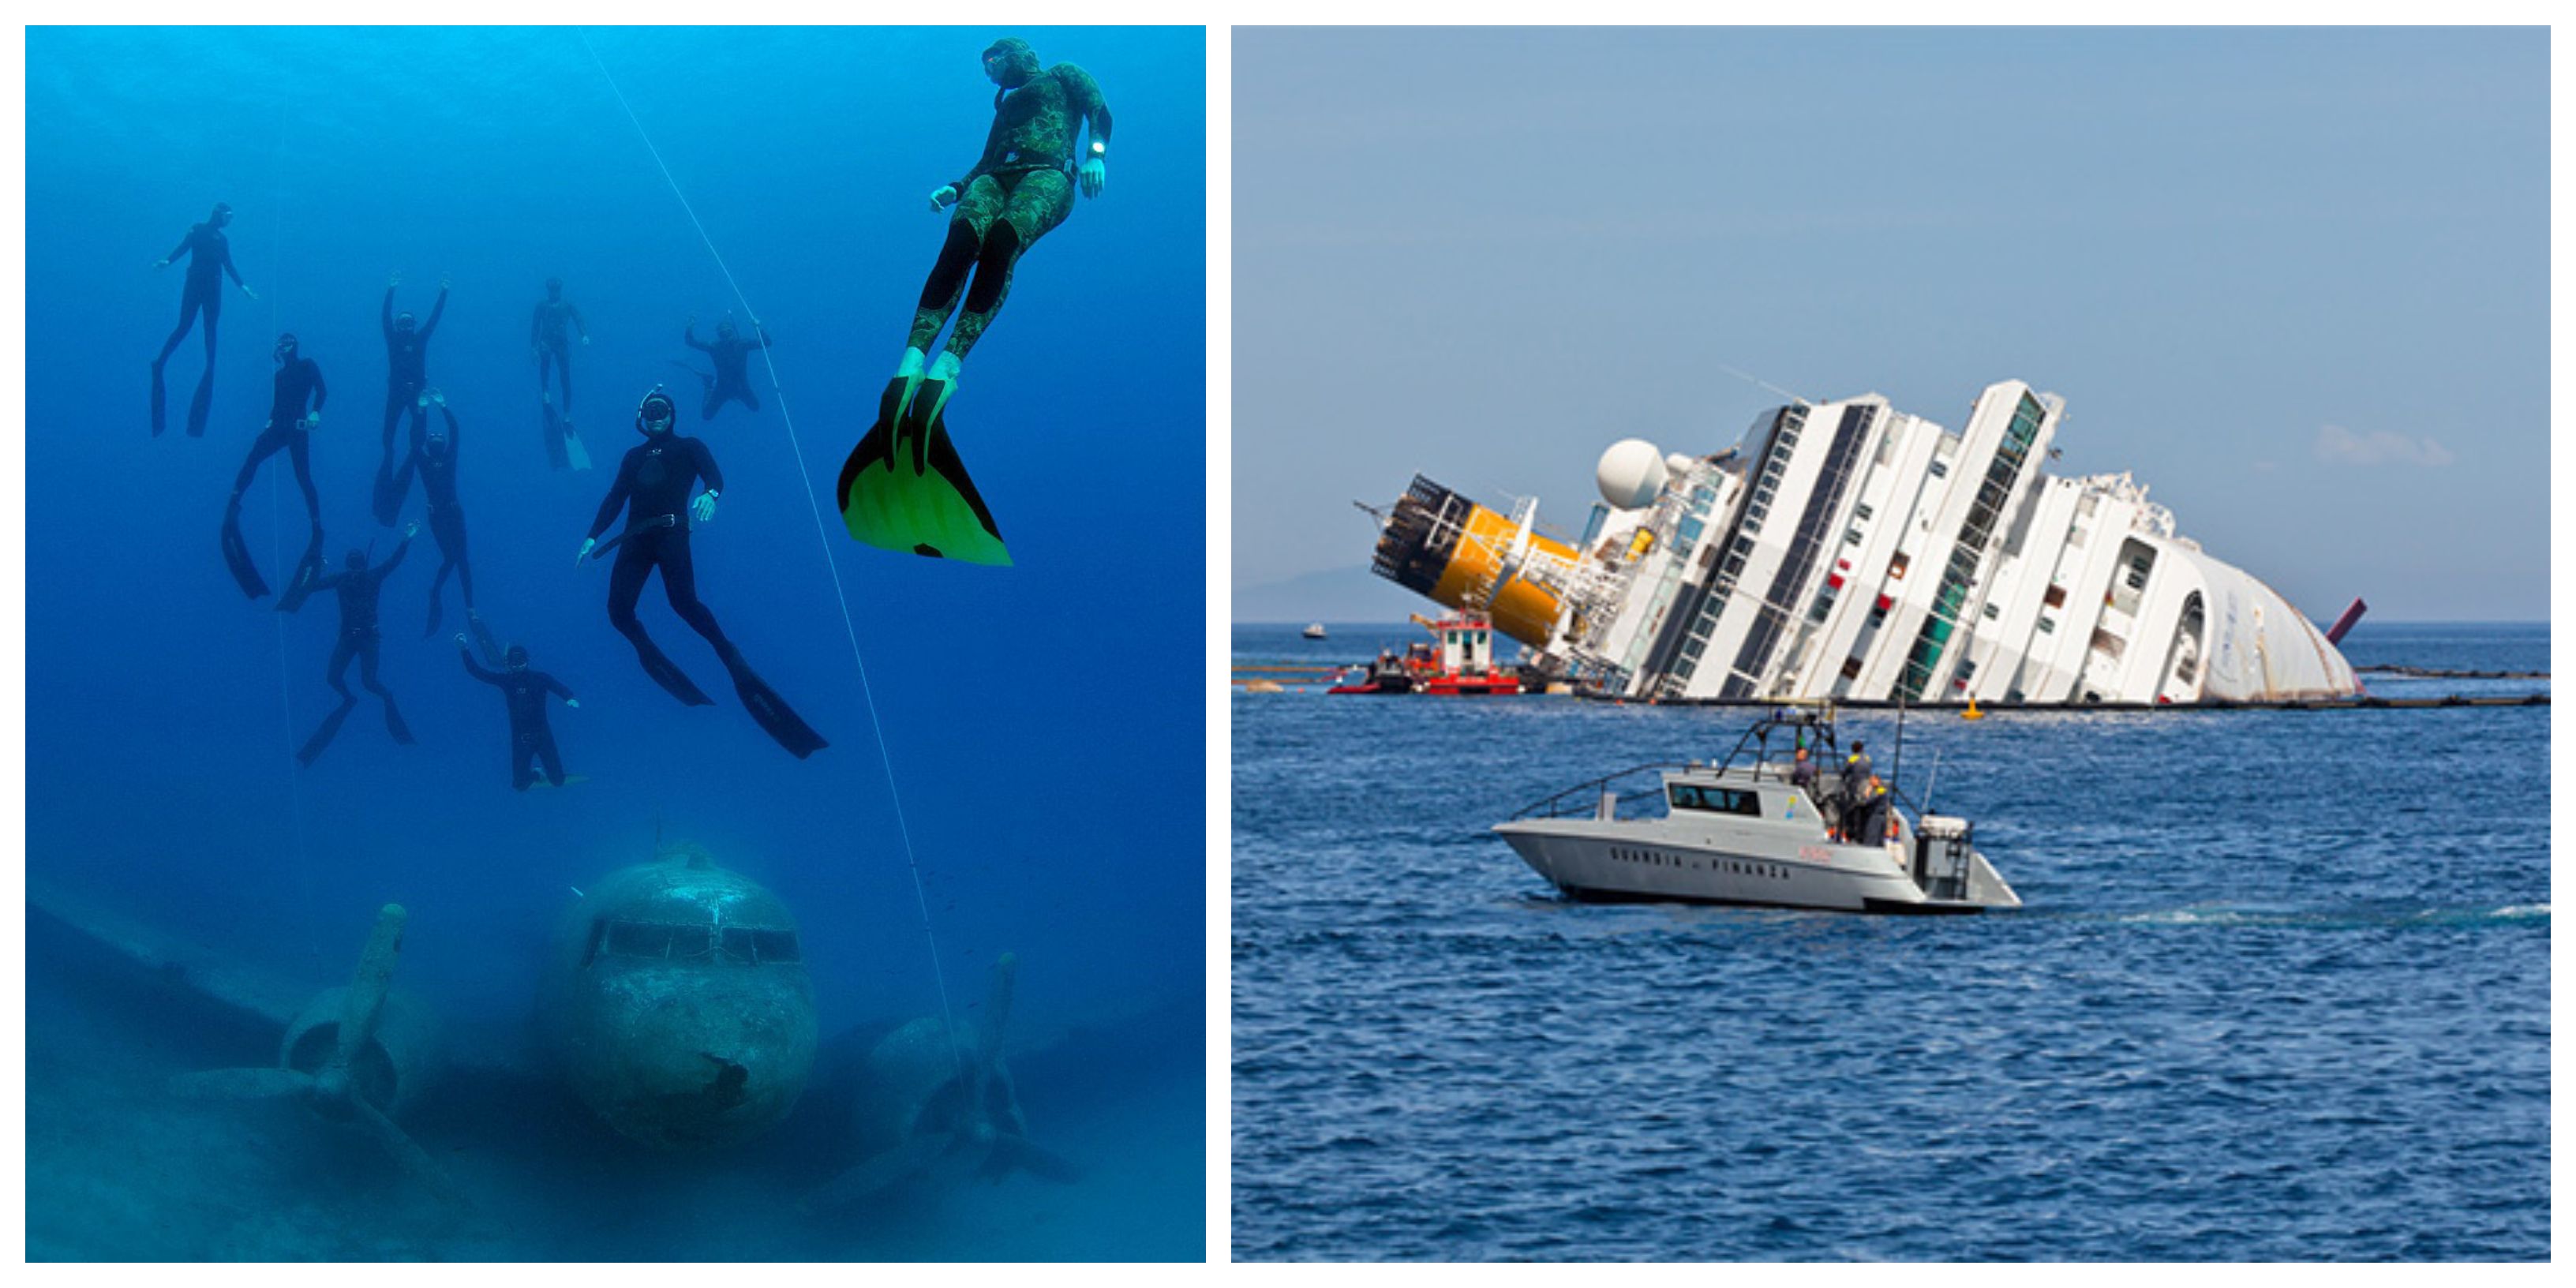 9 Images Of Cruise Ships Crushed By Mother Nature 9 Images